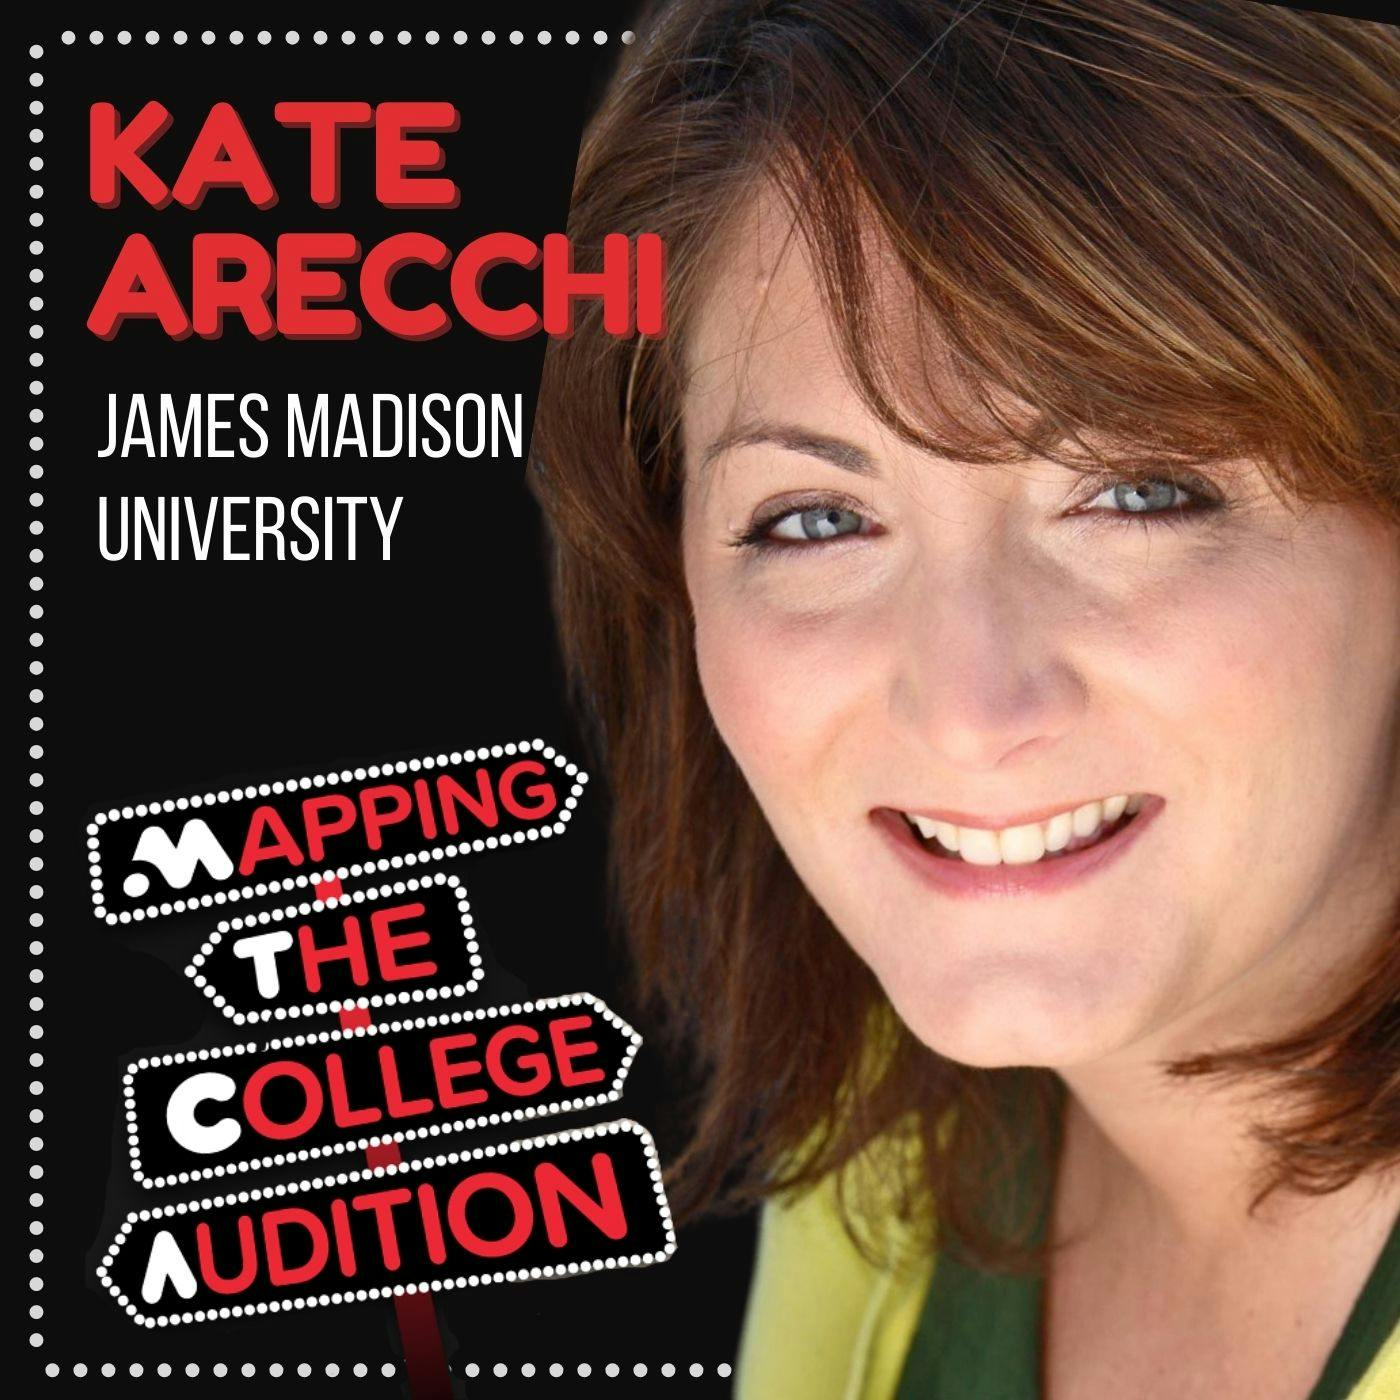 Ep. 51 (CDD): Kate Arecchi (James Madison University) on the Flexibility with a BA